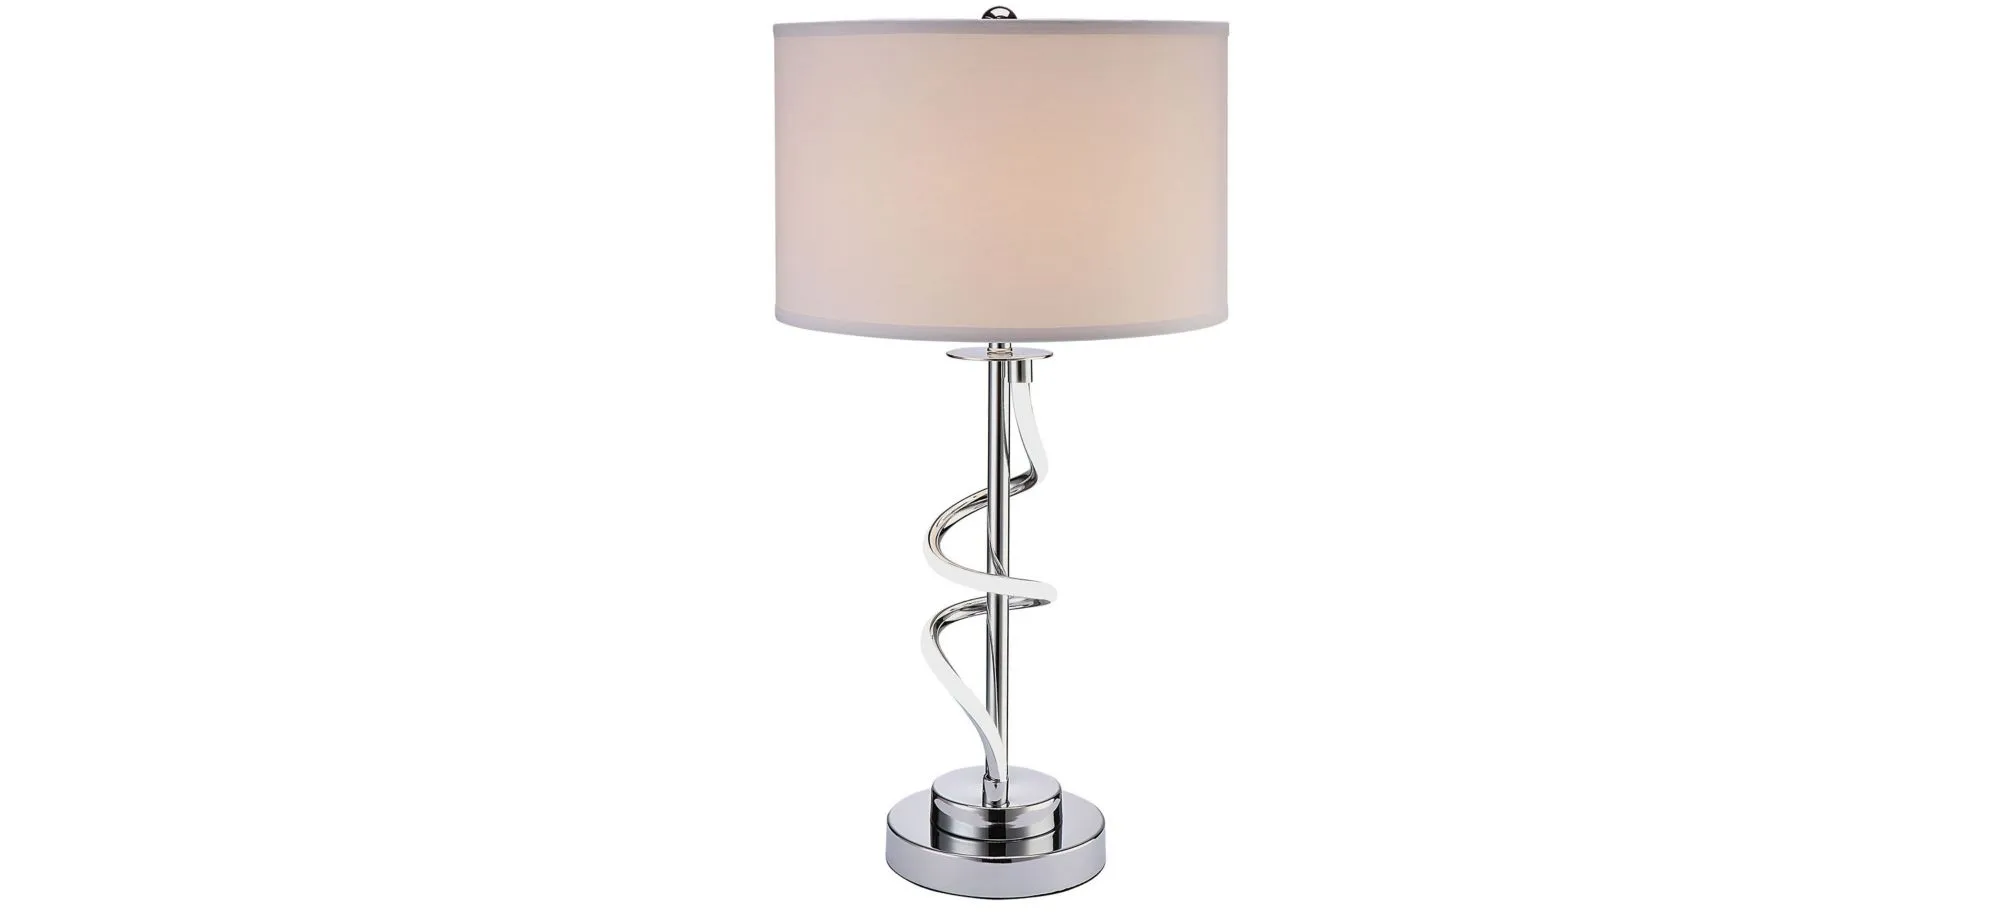 Josiri Table Lamp in Chrome by Anthony California